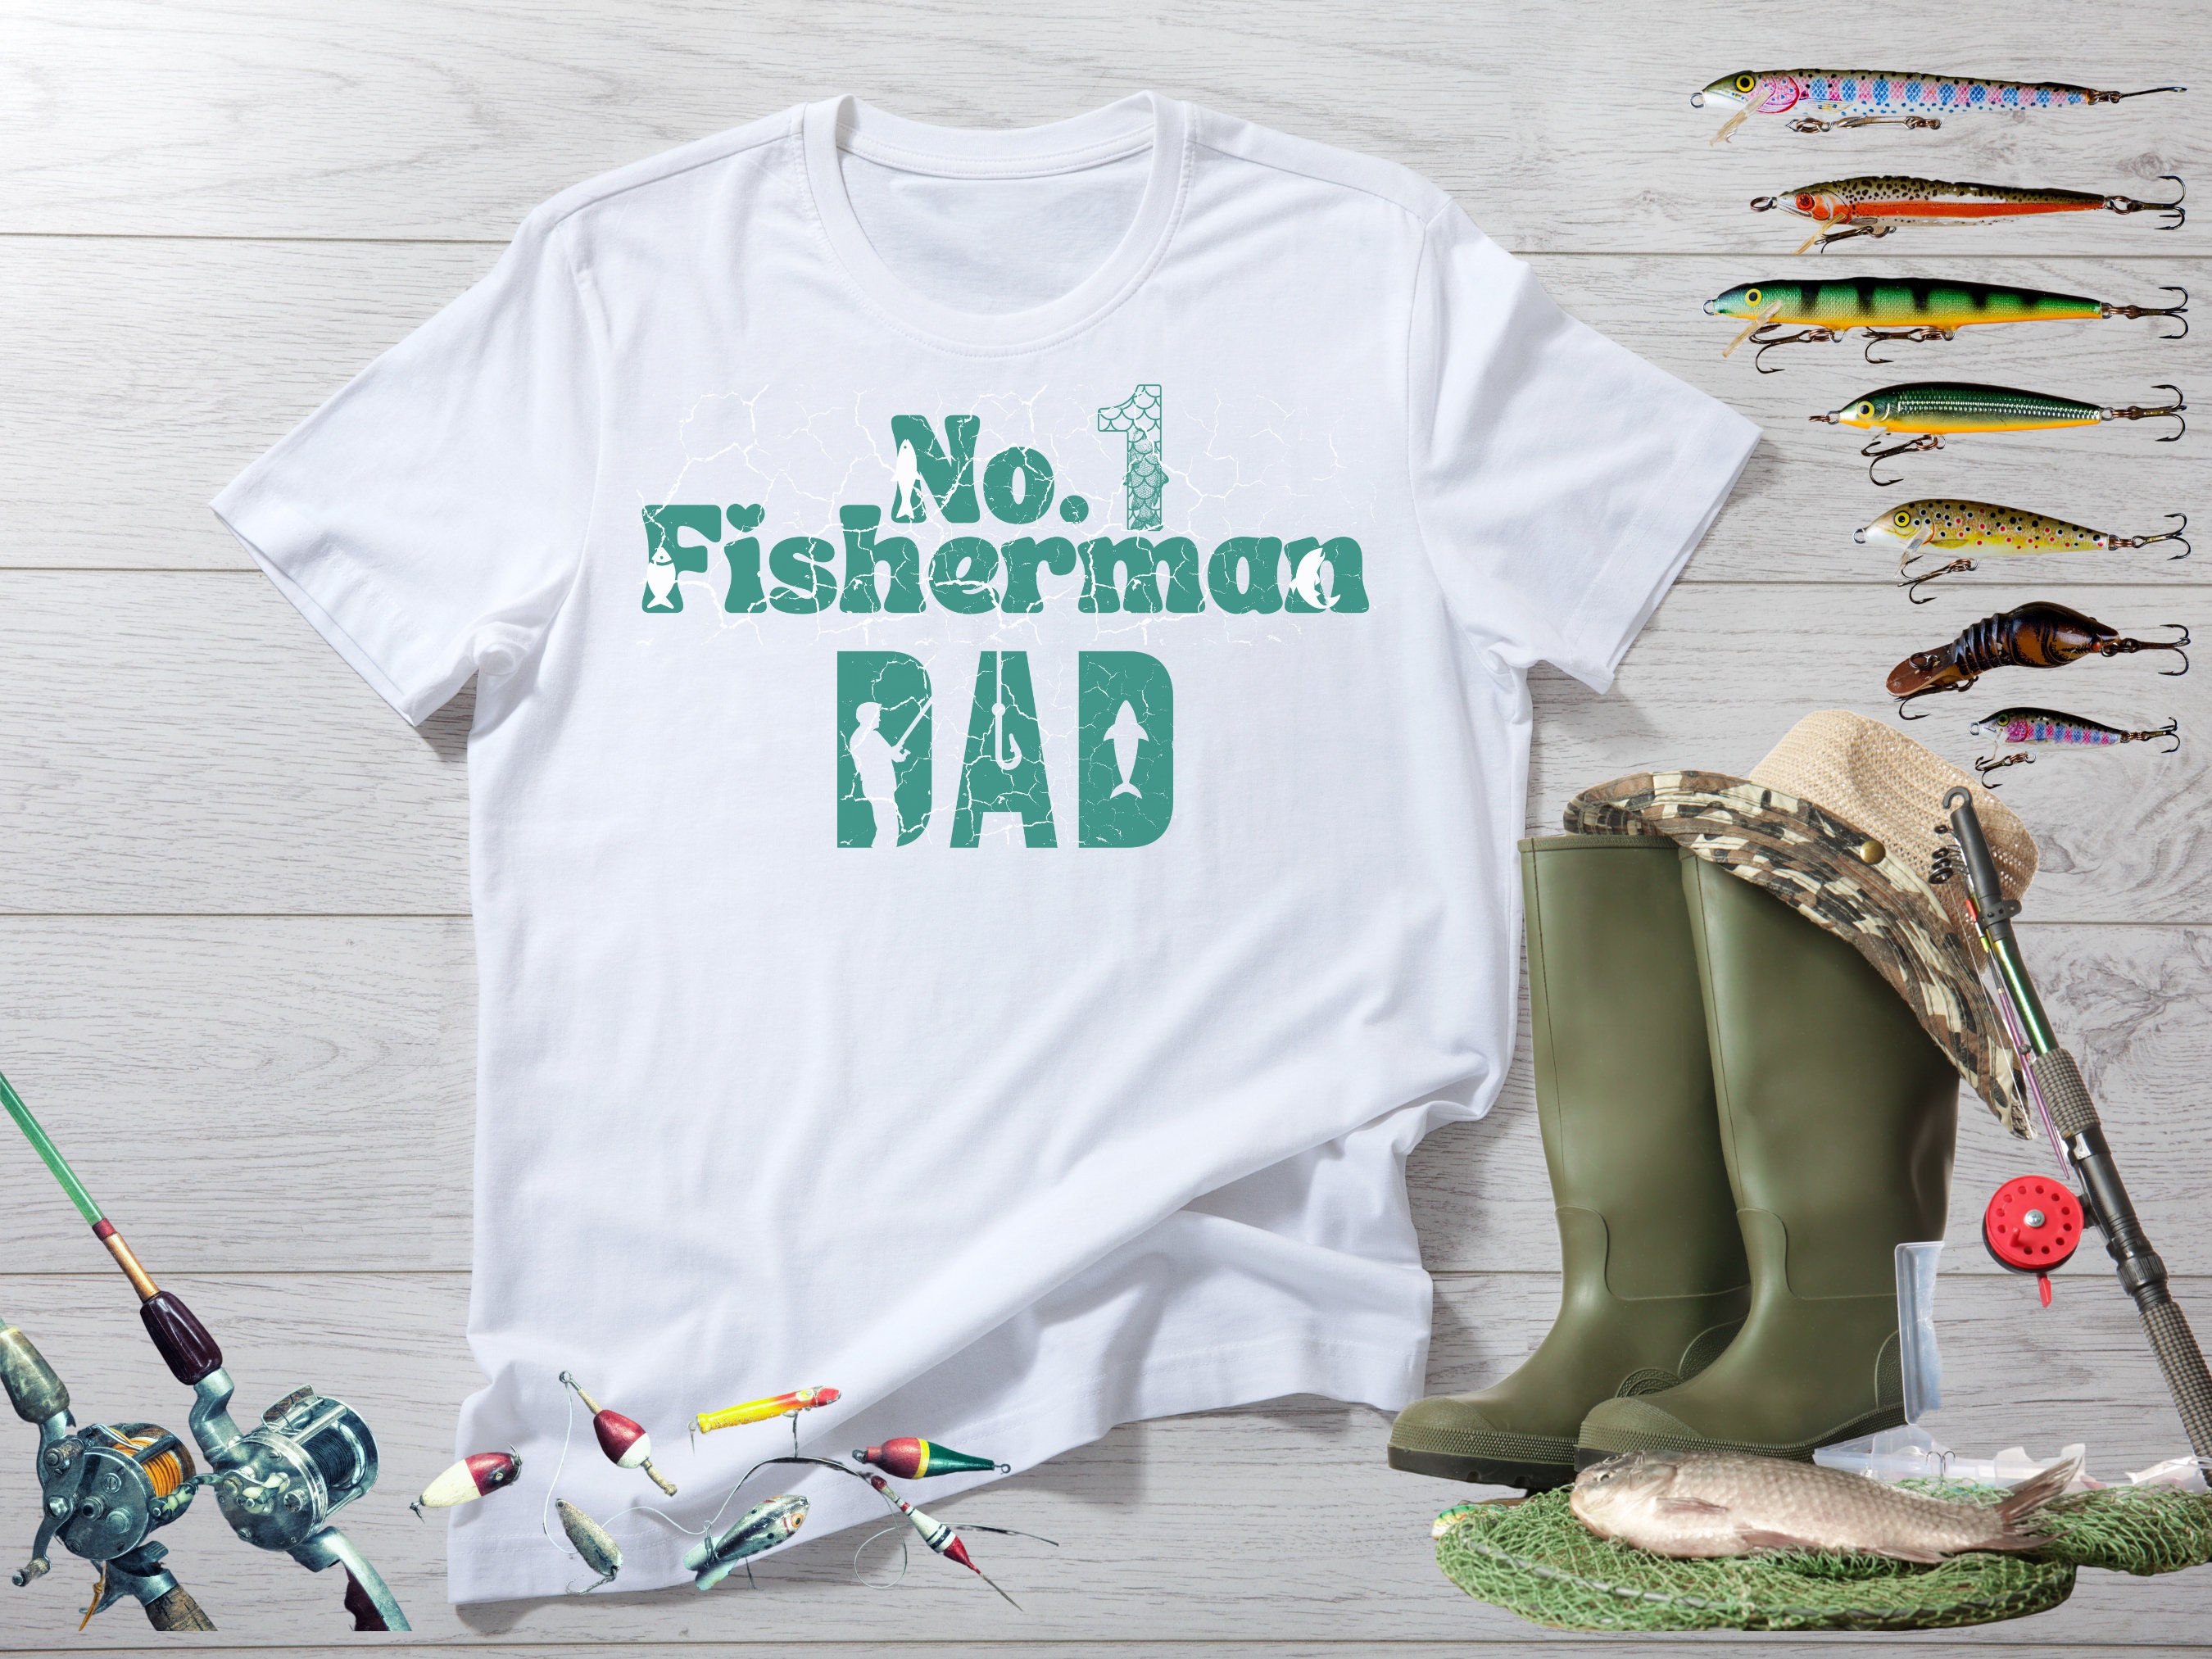 Best Dad Birthday Gift, Fisherman Dad T-shirt, Fishing Gifts for Men, Dad  Fishing Shirt, Fathers Day Gifts, Christmas Gift From Kids 